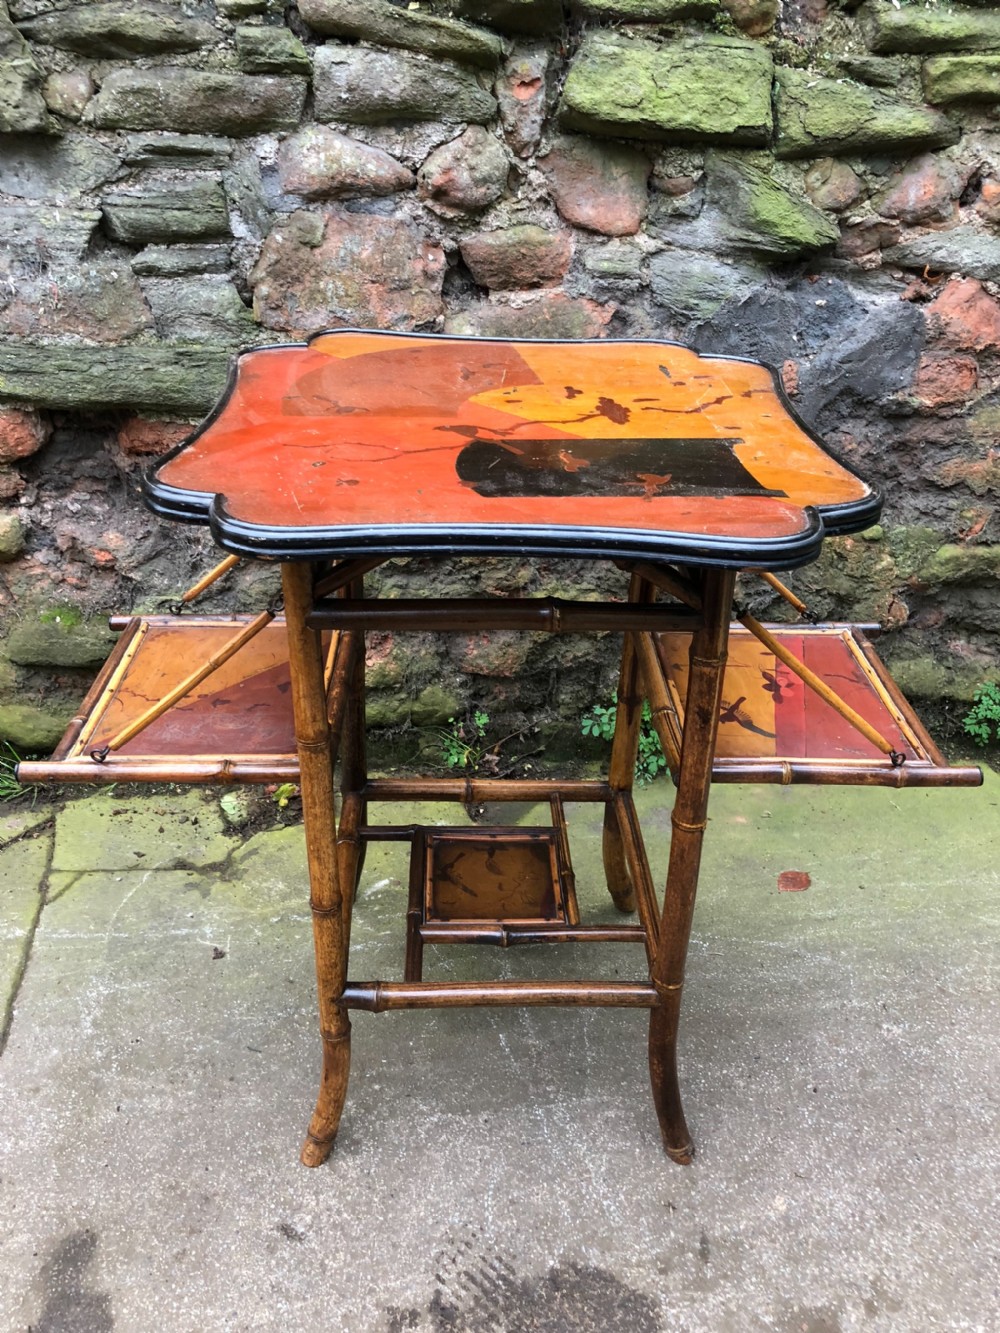 edwardian lacquered bamboo table with two adjustable shelves